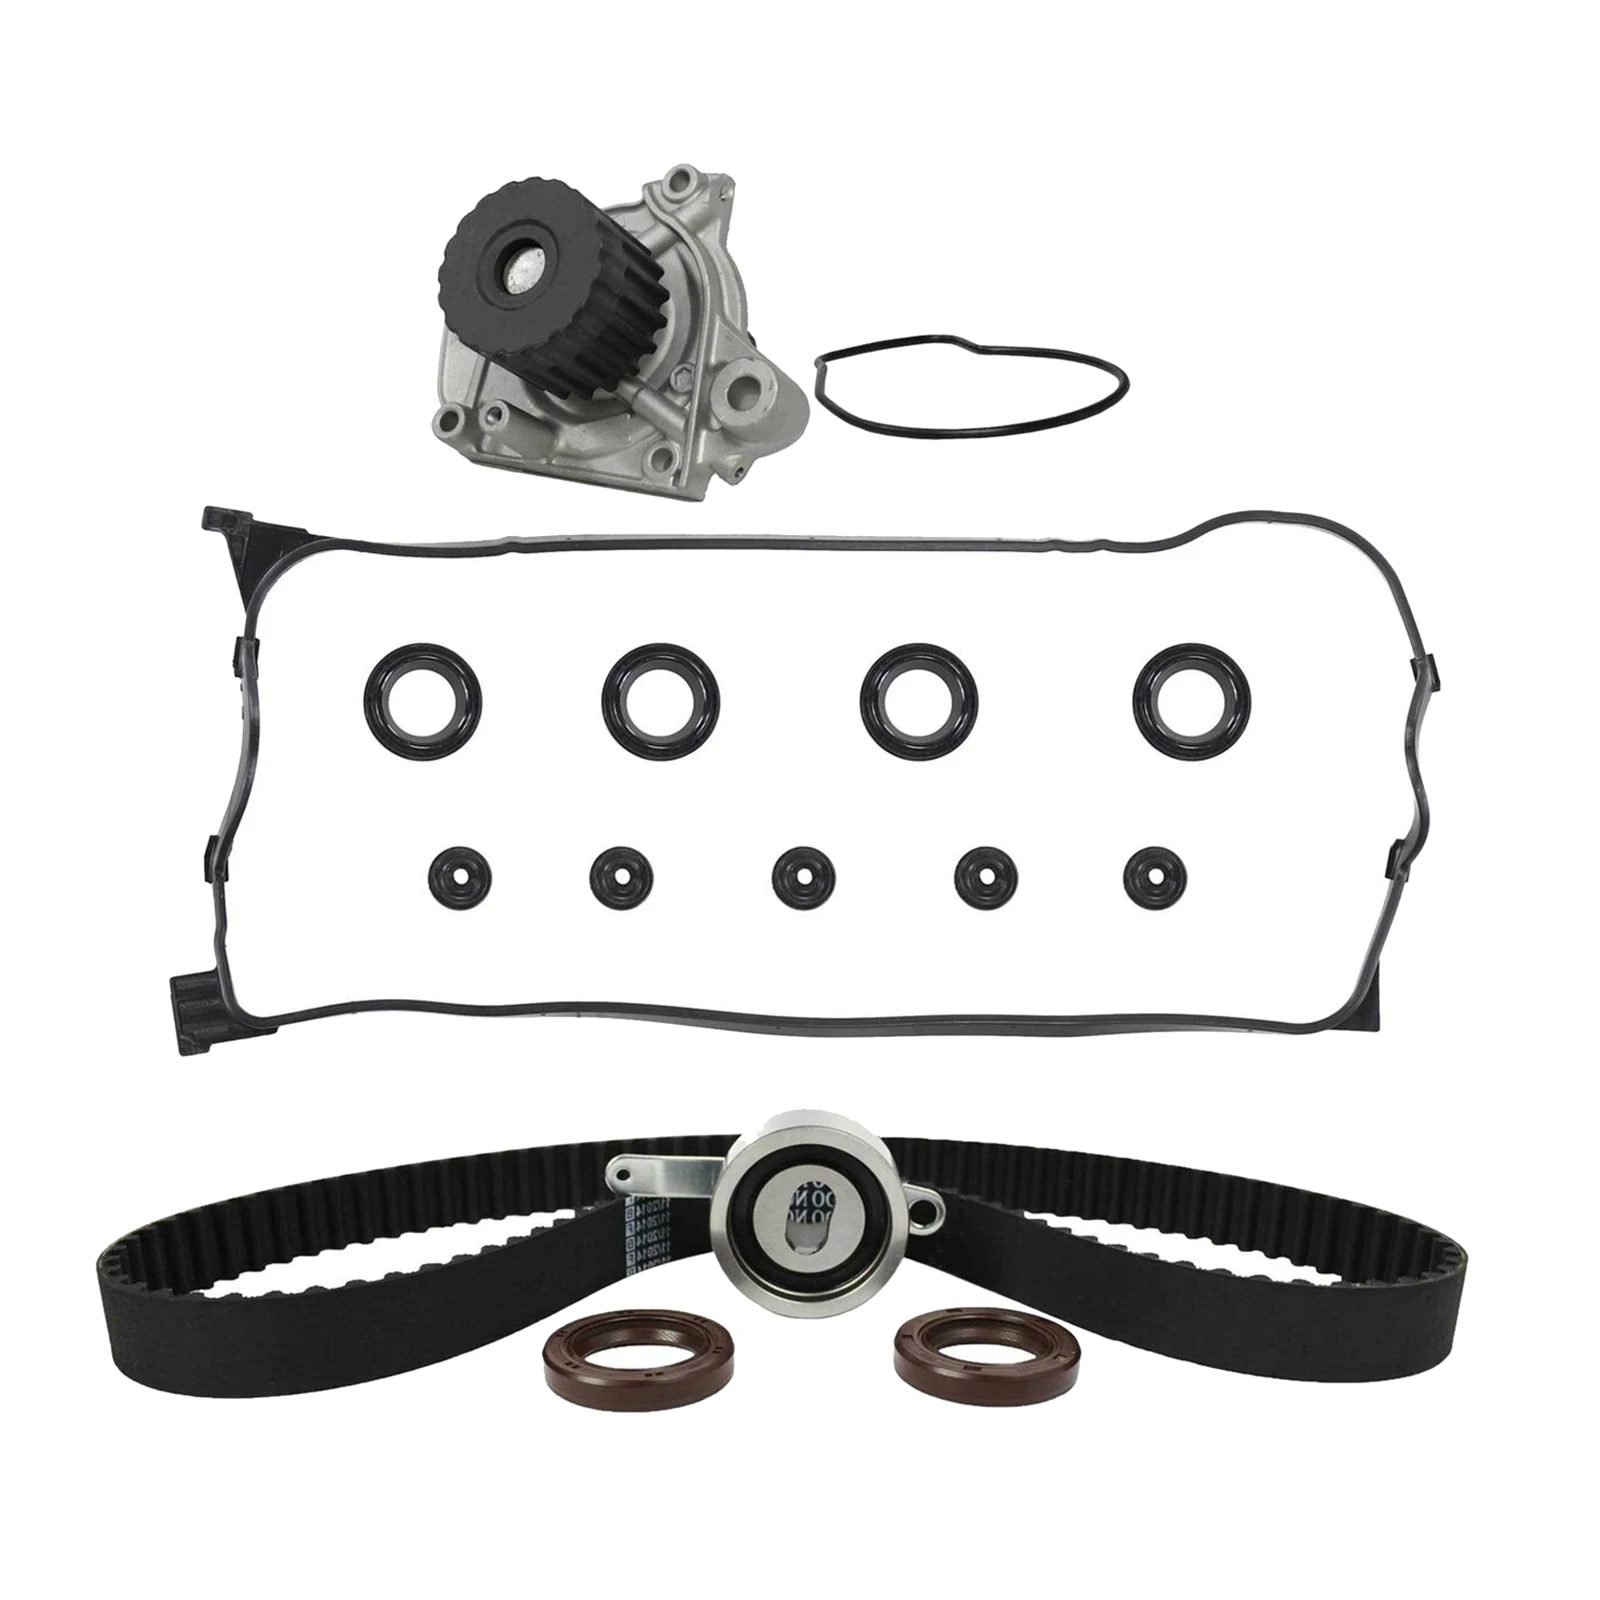 New Timing Belt Water Pump Valve Cover Kit Fit for Honda Civic Del Sol 1.6L SOHC 1996-2000 Easy to Install